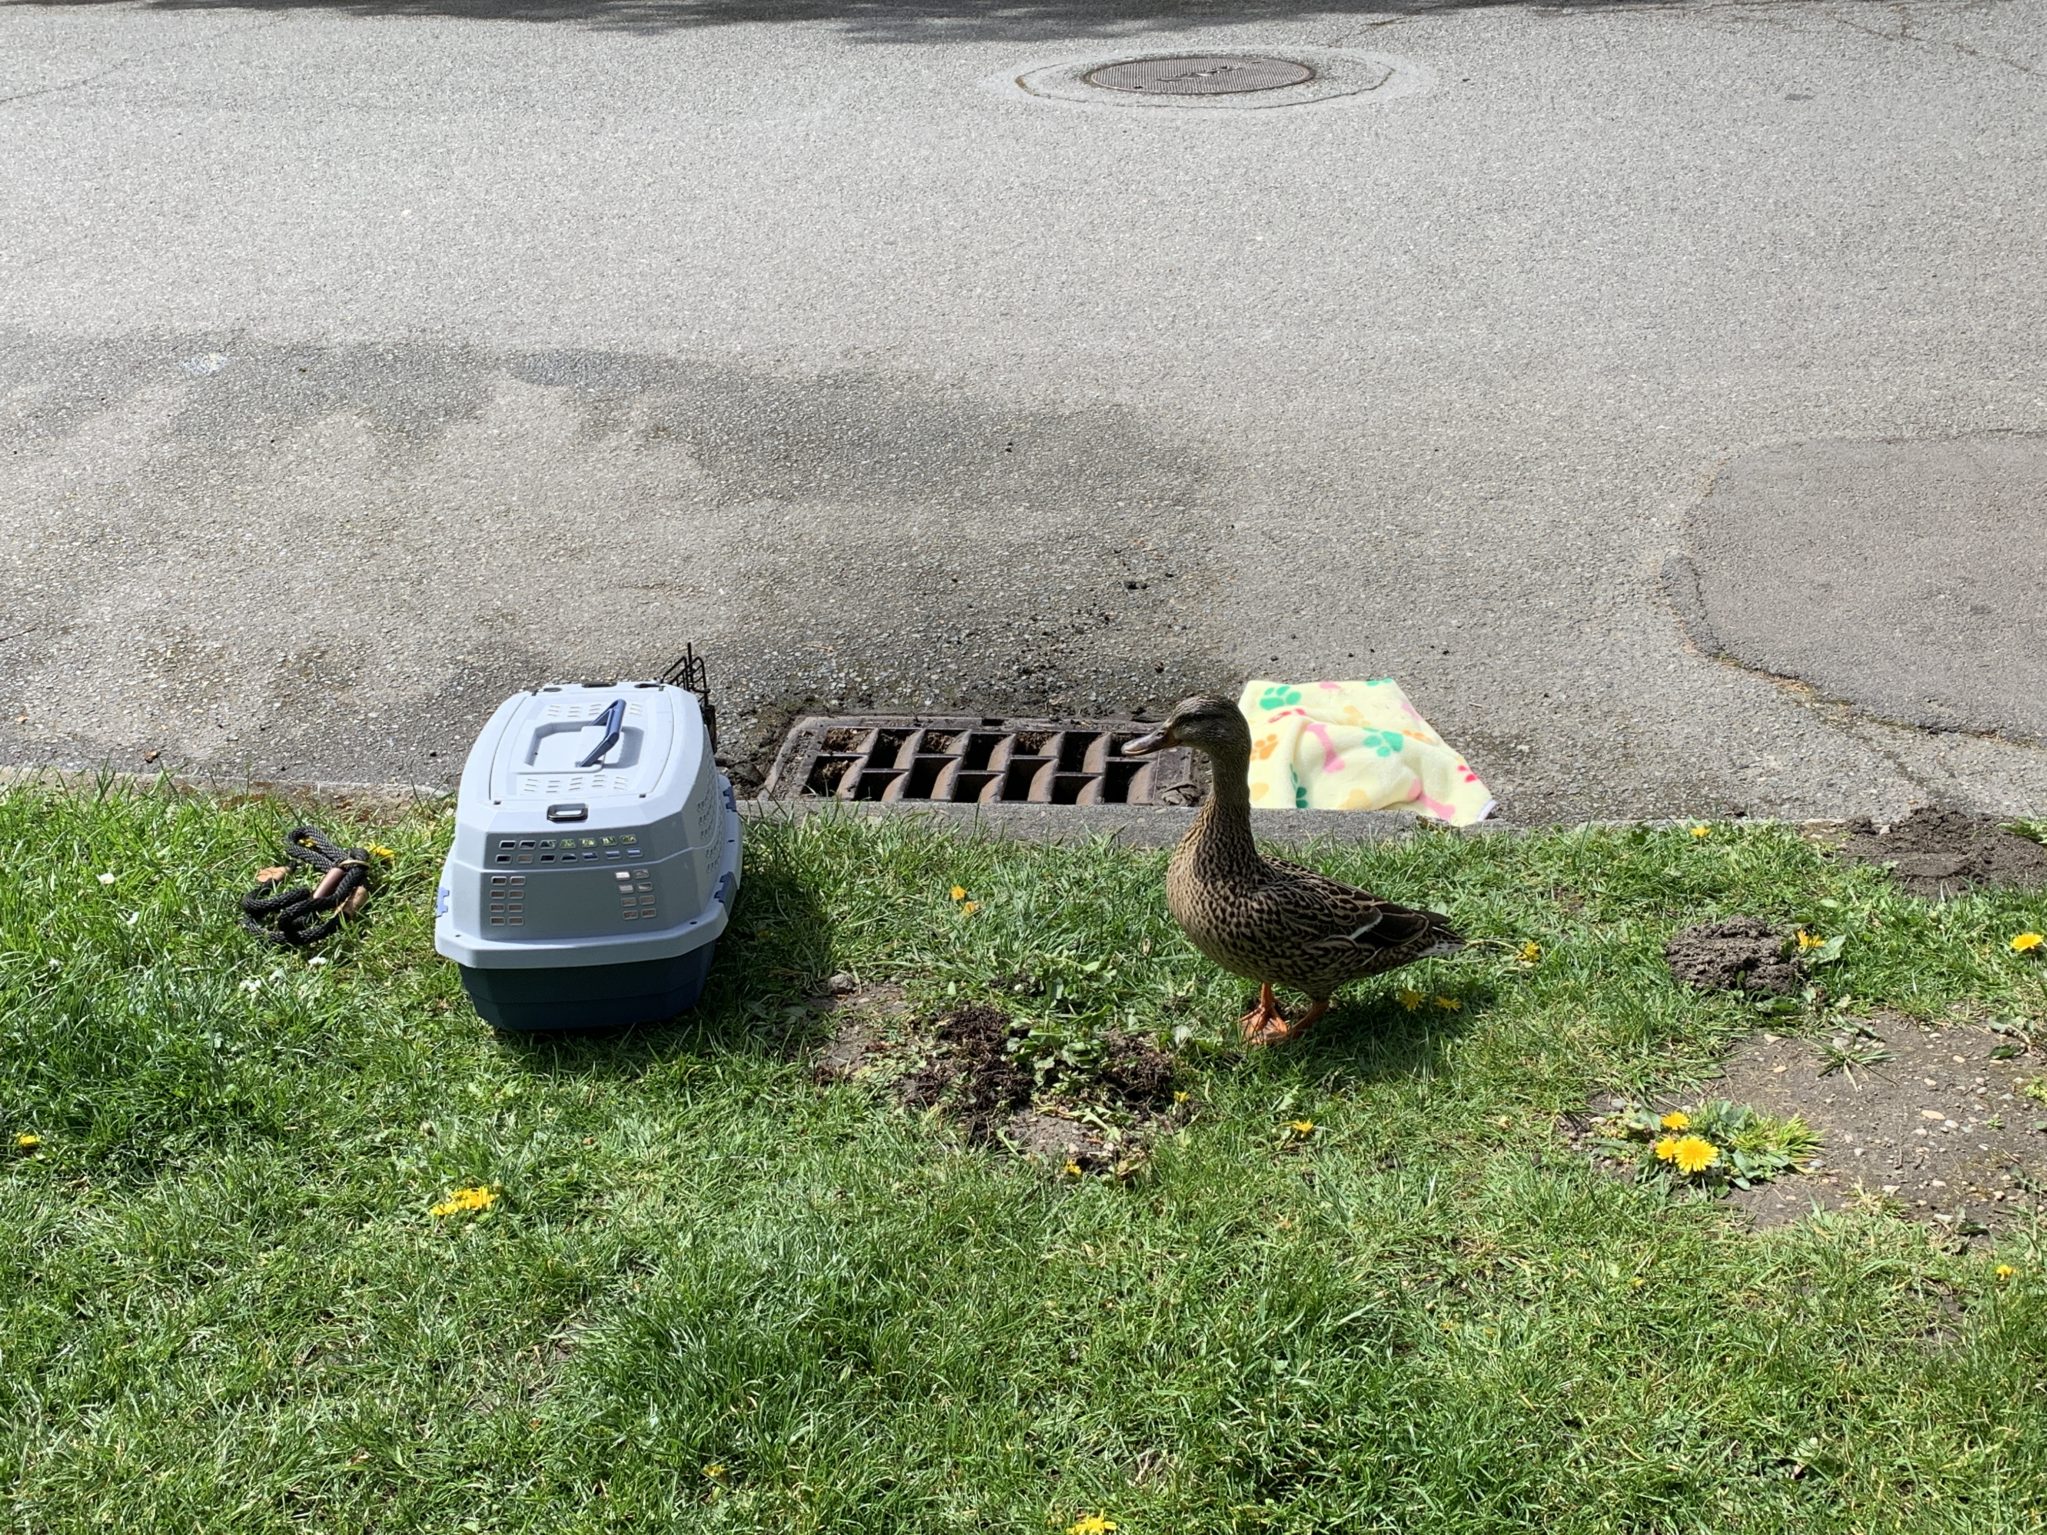 Misdirected mallards freed from storm drain by resourceful officer